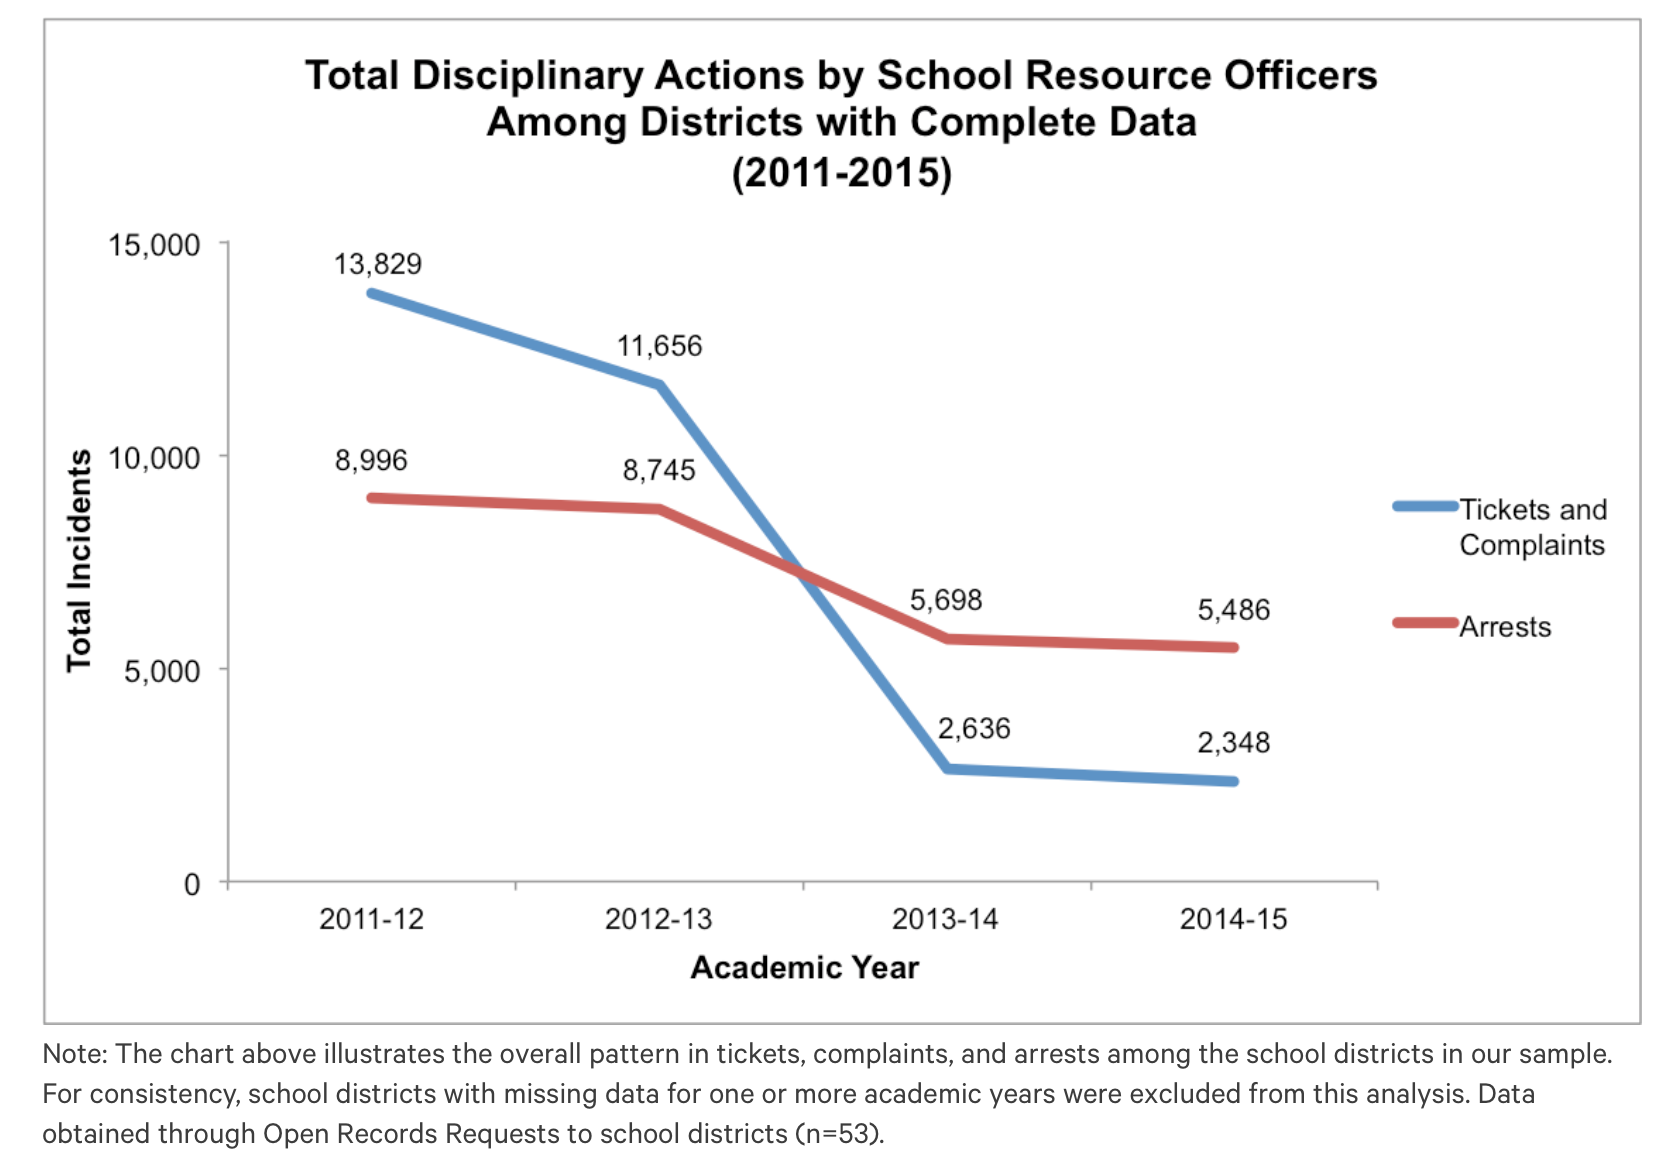 Line graph showing the total disciplinary actions by school resource officers among districts with complete data from 2011-2015